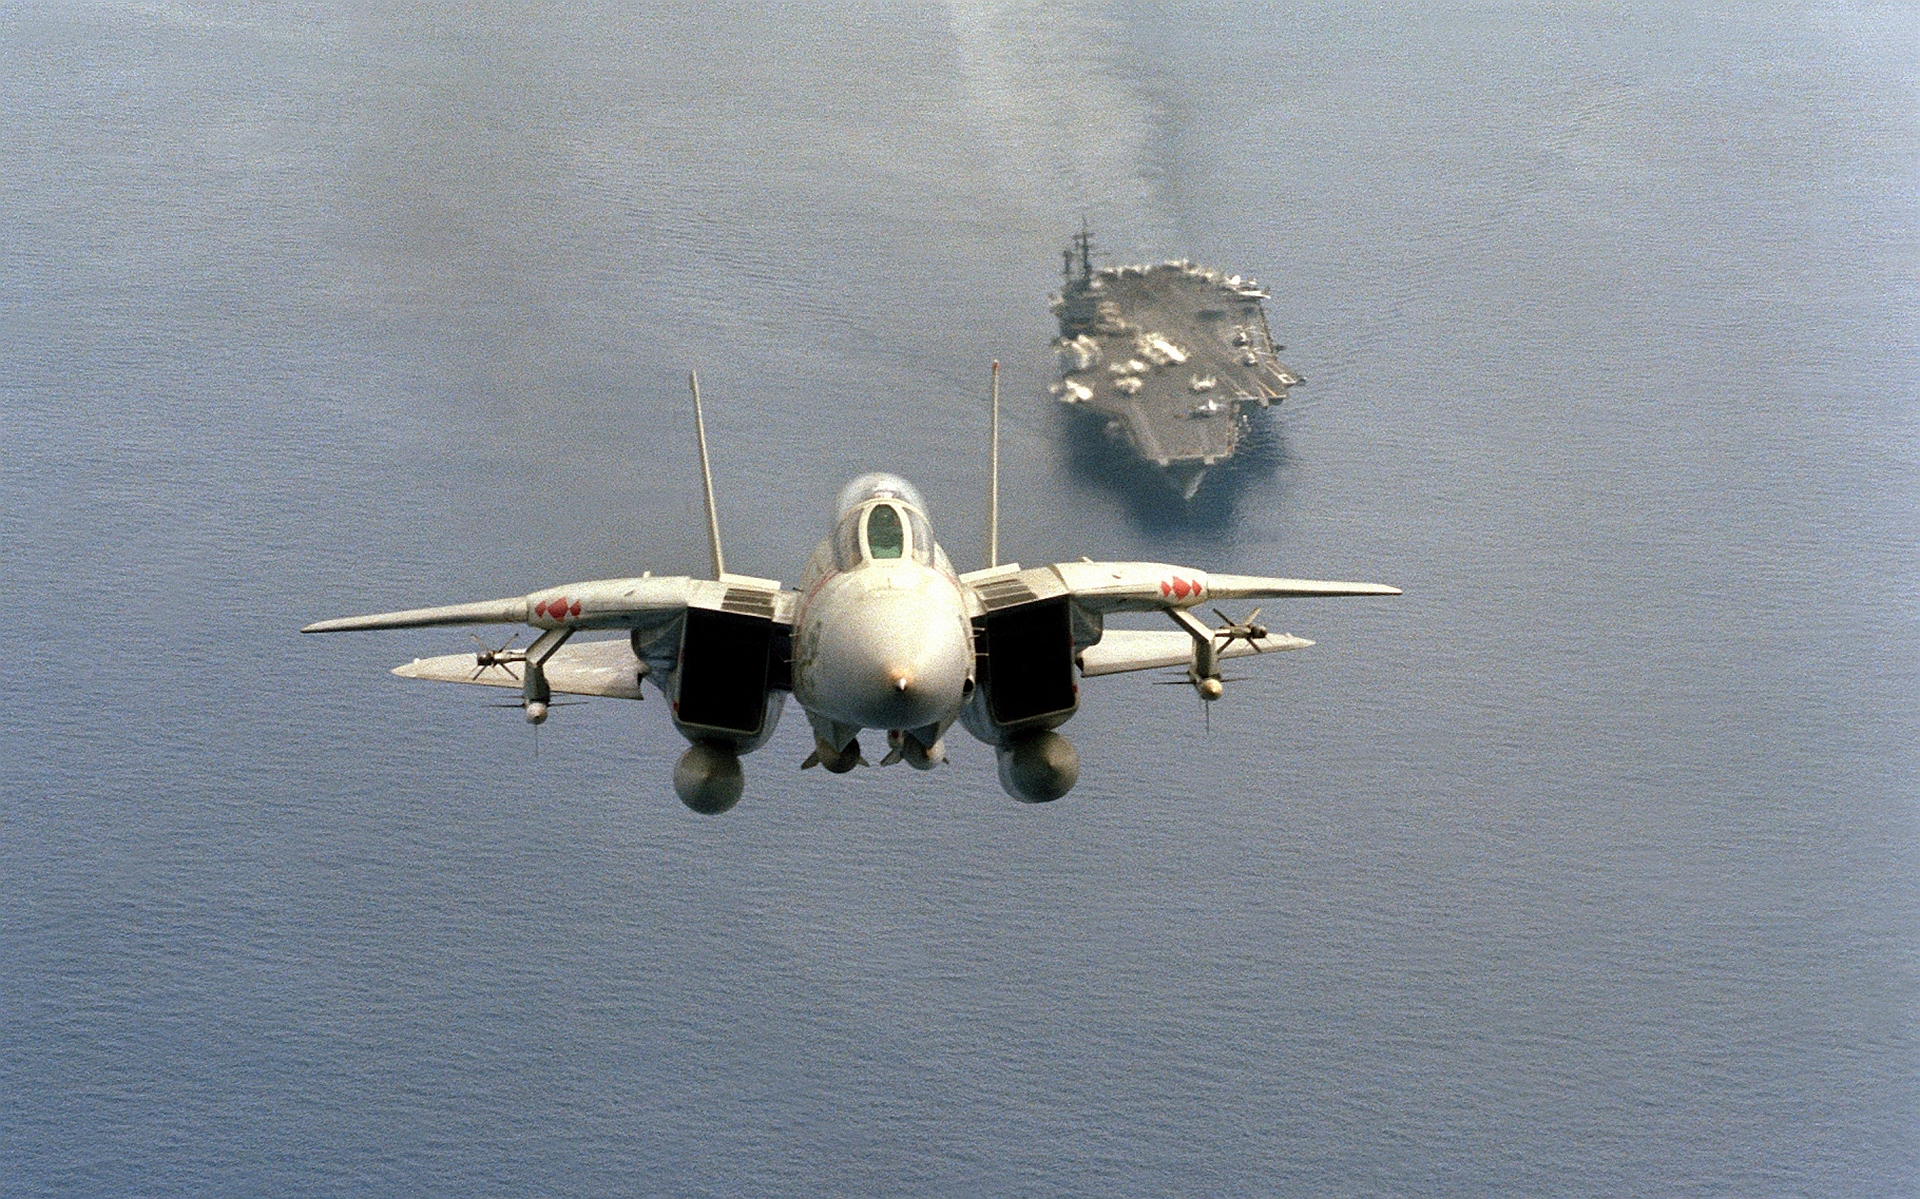 40+ Grumman F-14 Tomcat HD Wallpapers and Backgrounds